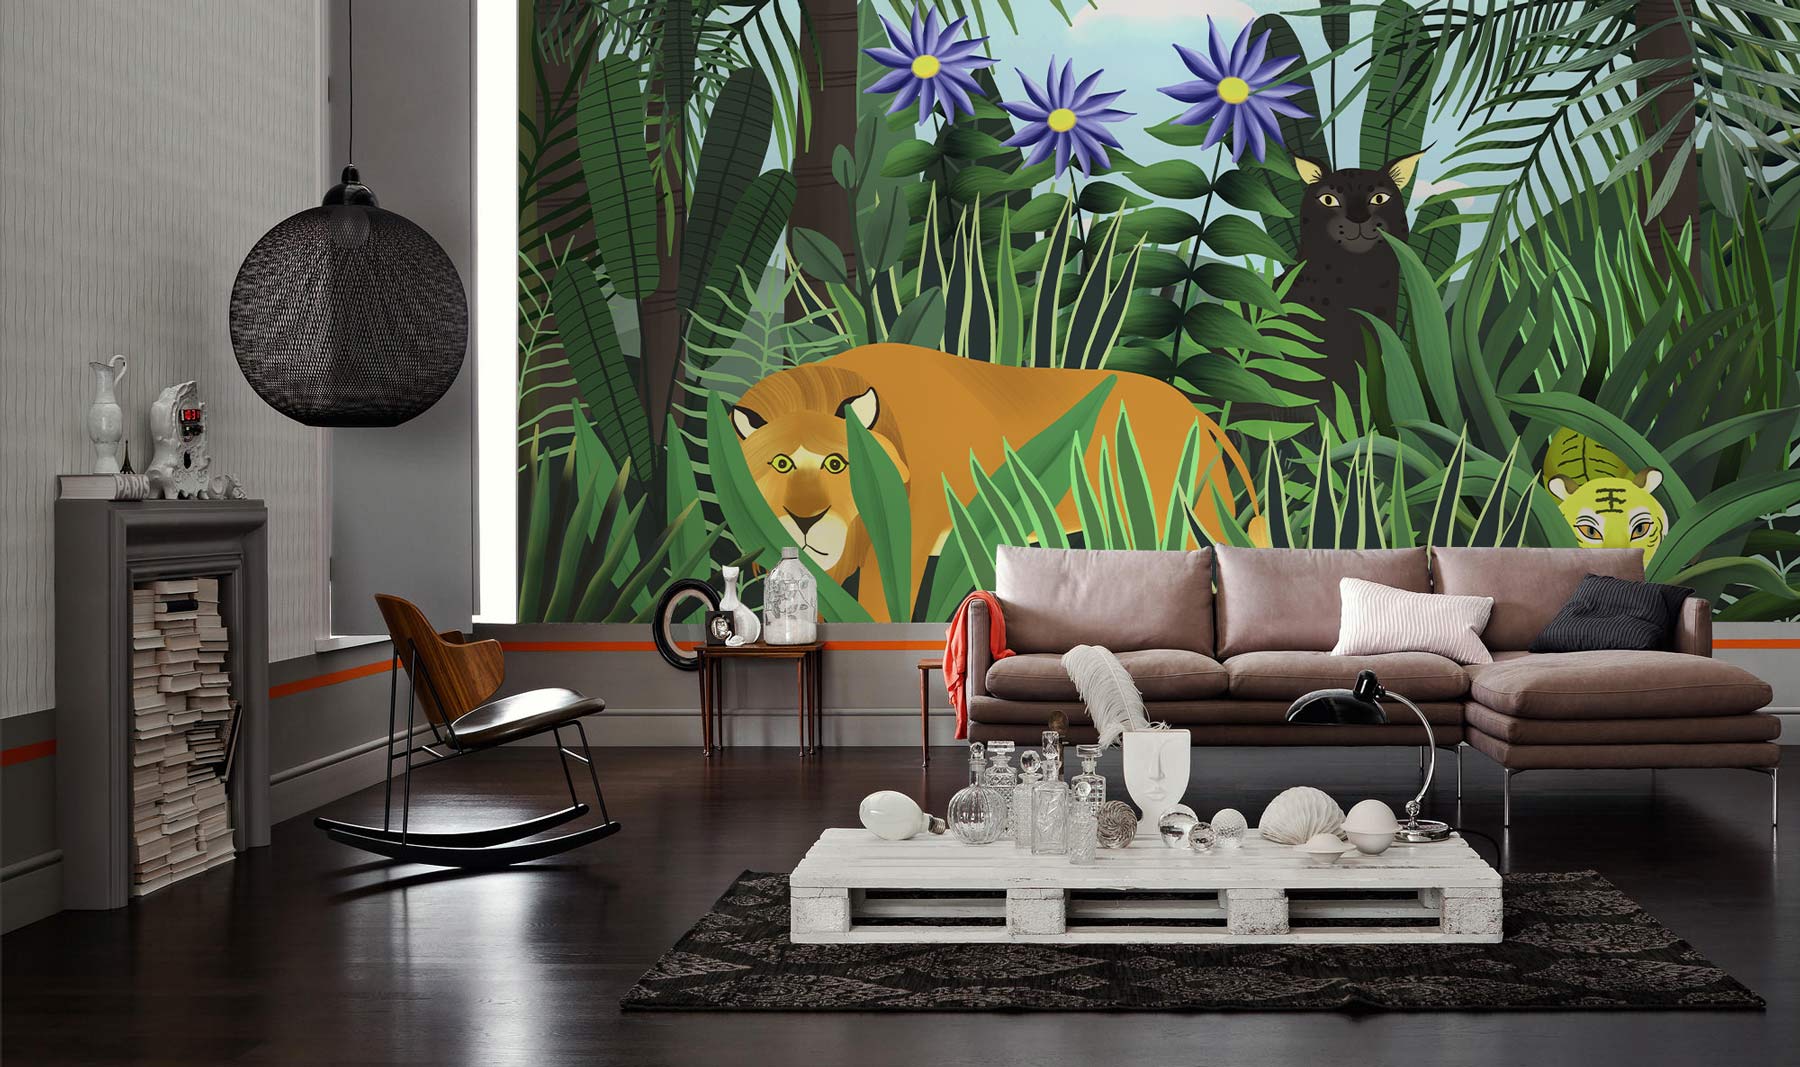 Animals of the Jungle Wallpaper Mural Used as Living Room Decoration